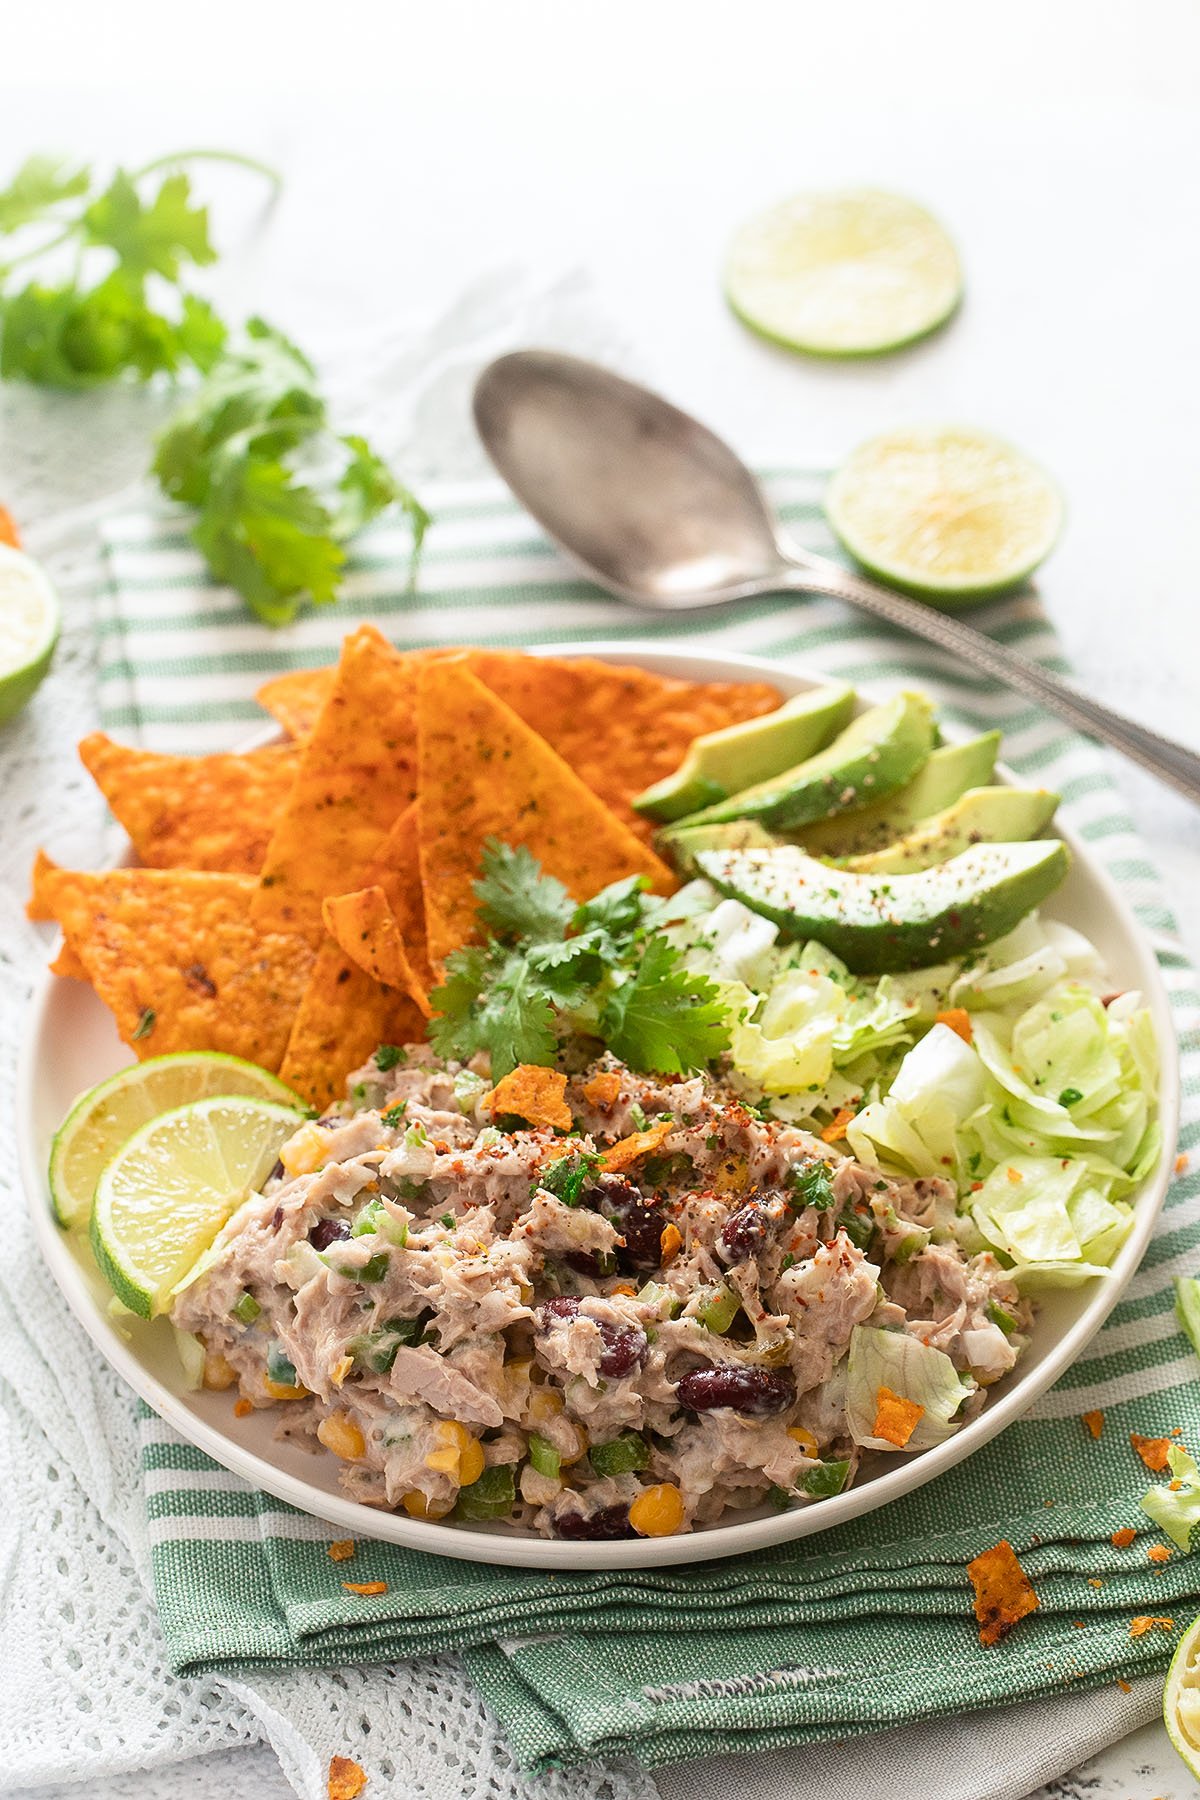 plate with tuna salad with corn and beans, tortilla chips, avocado, lettuce and lime.